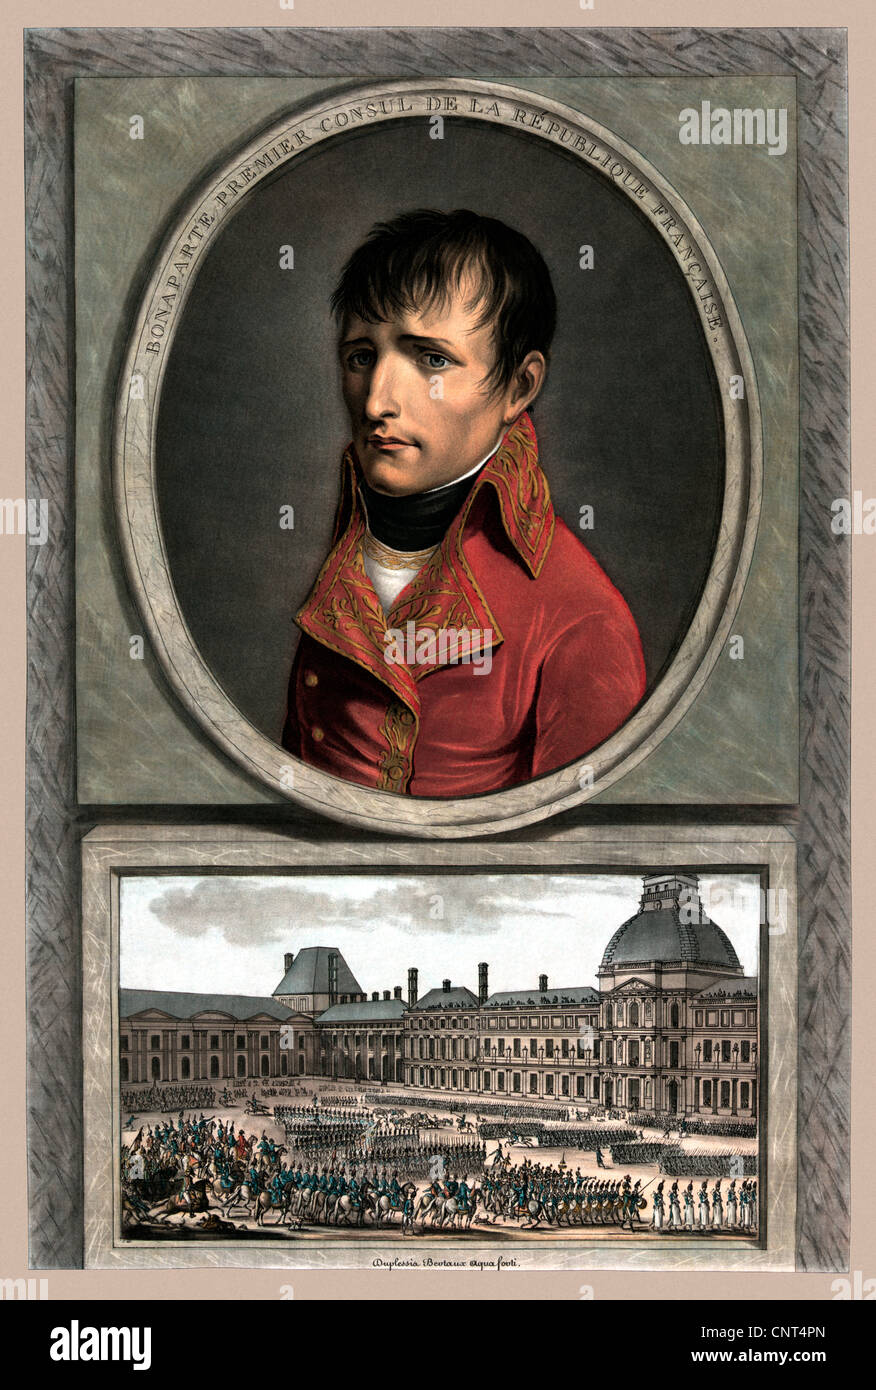 Vintage military portrait of Napoleon Bonaparte above a picture of a troop review. Stock Photo